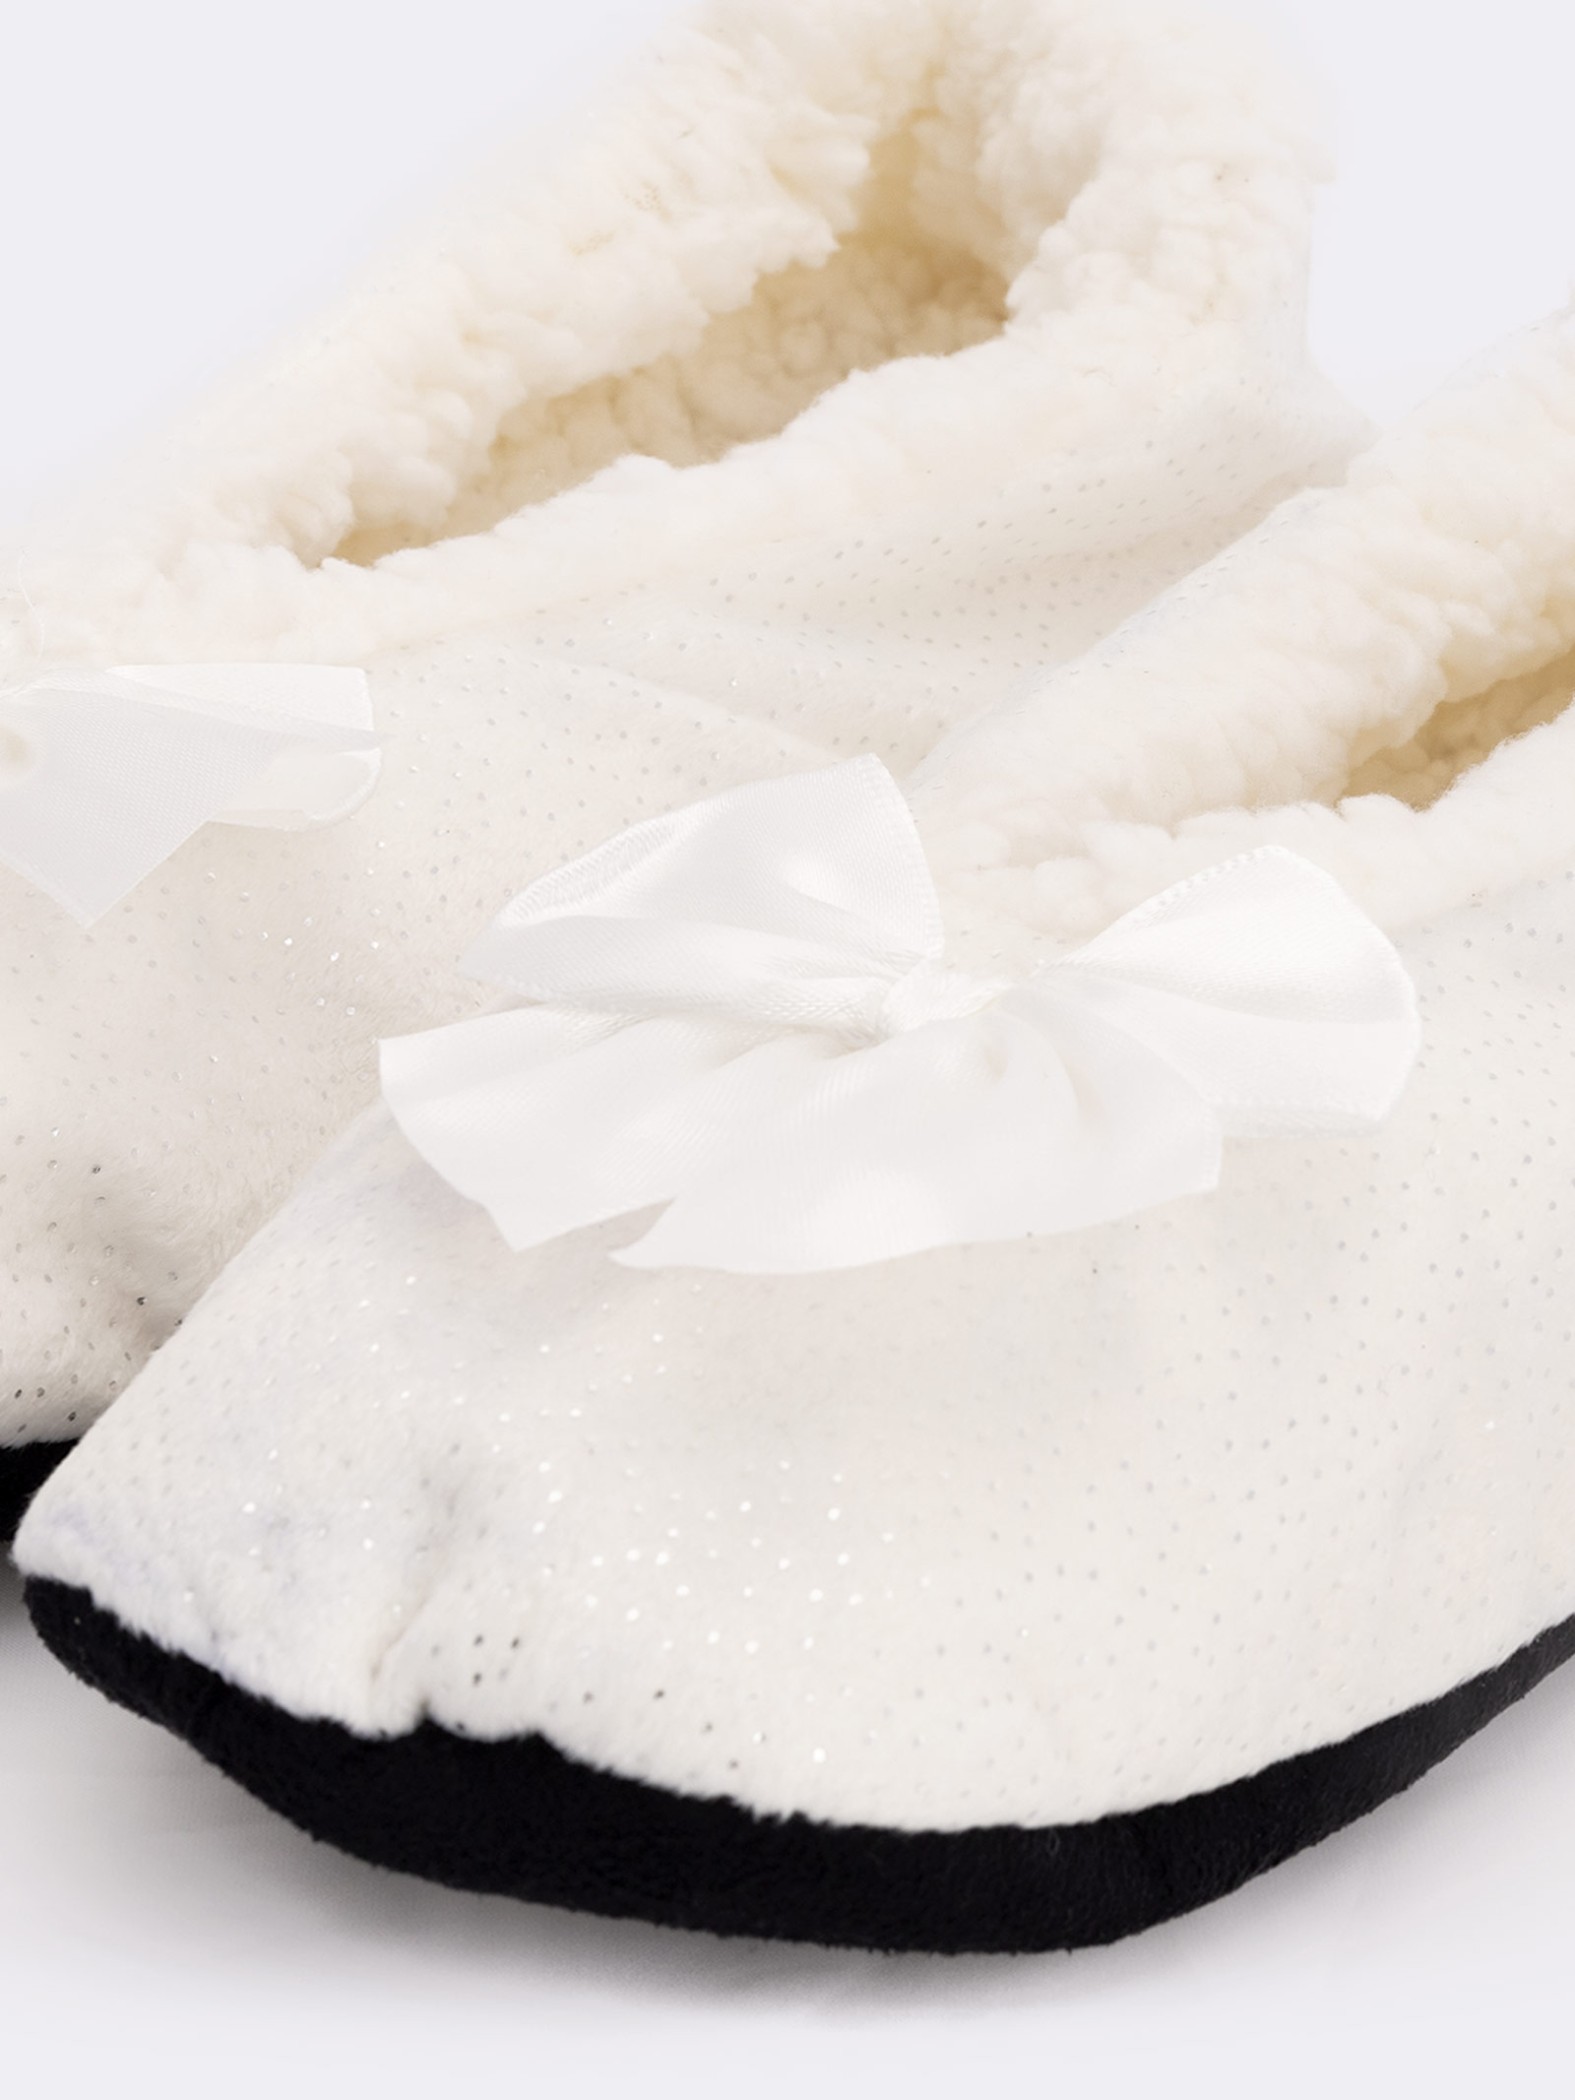 Women's slippers with bow and soft interior